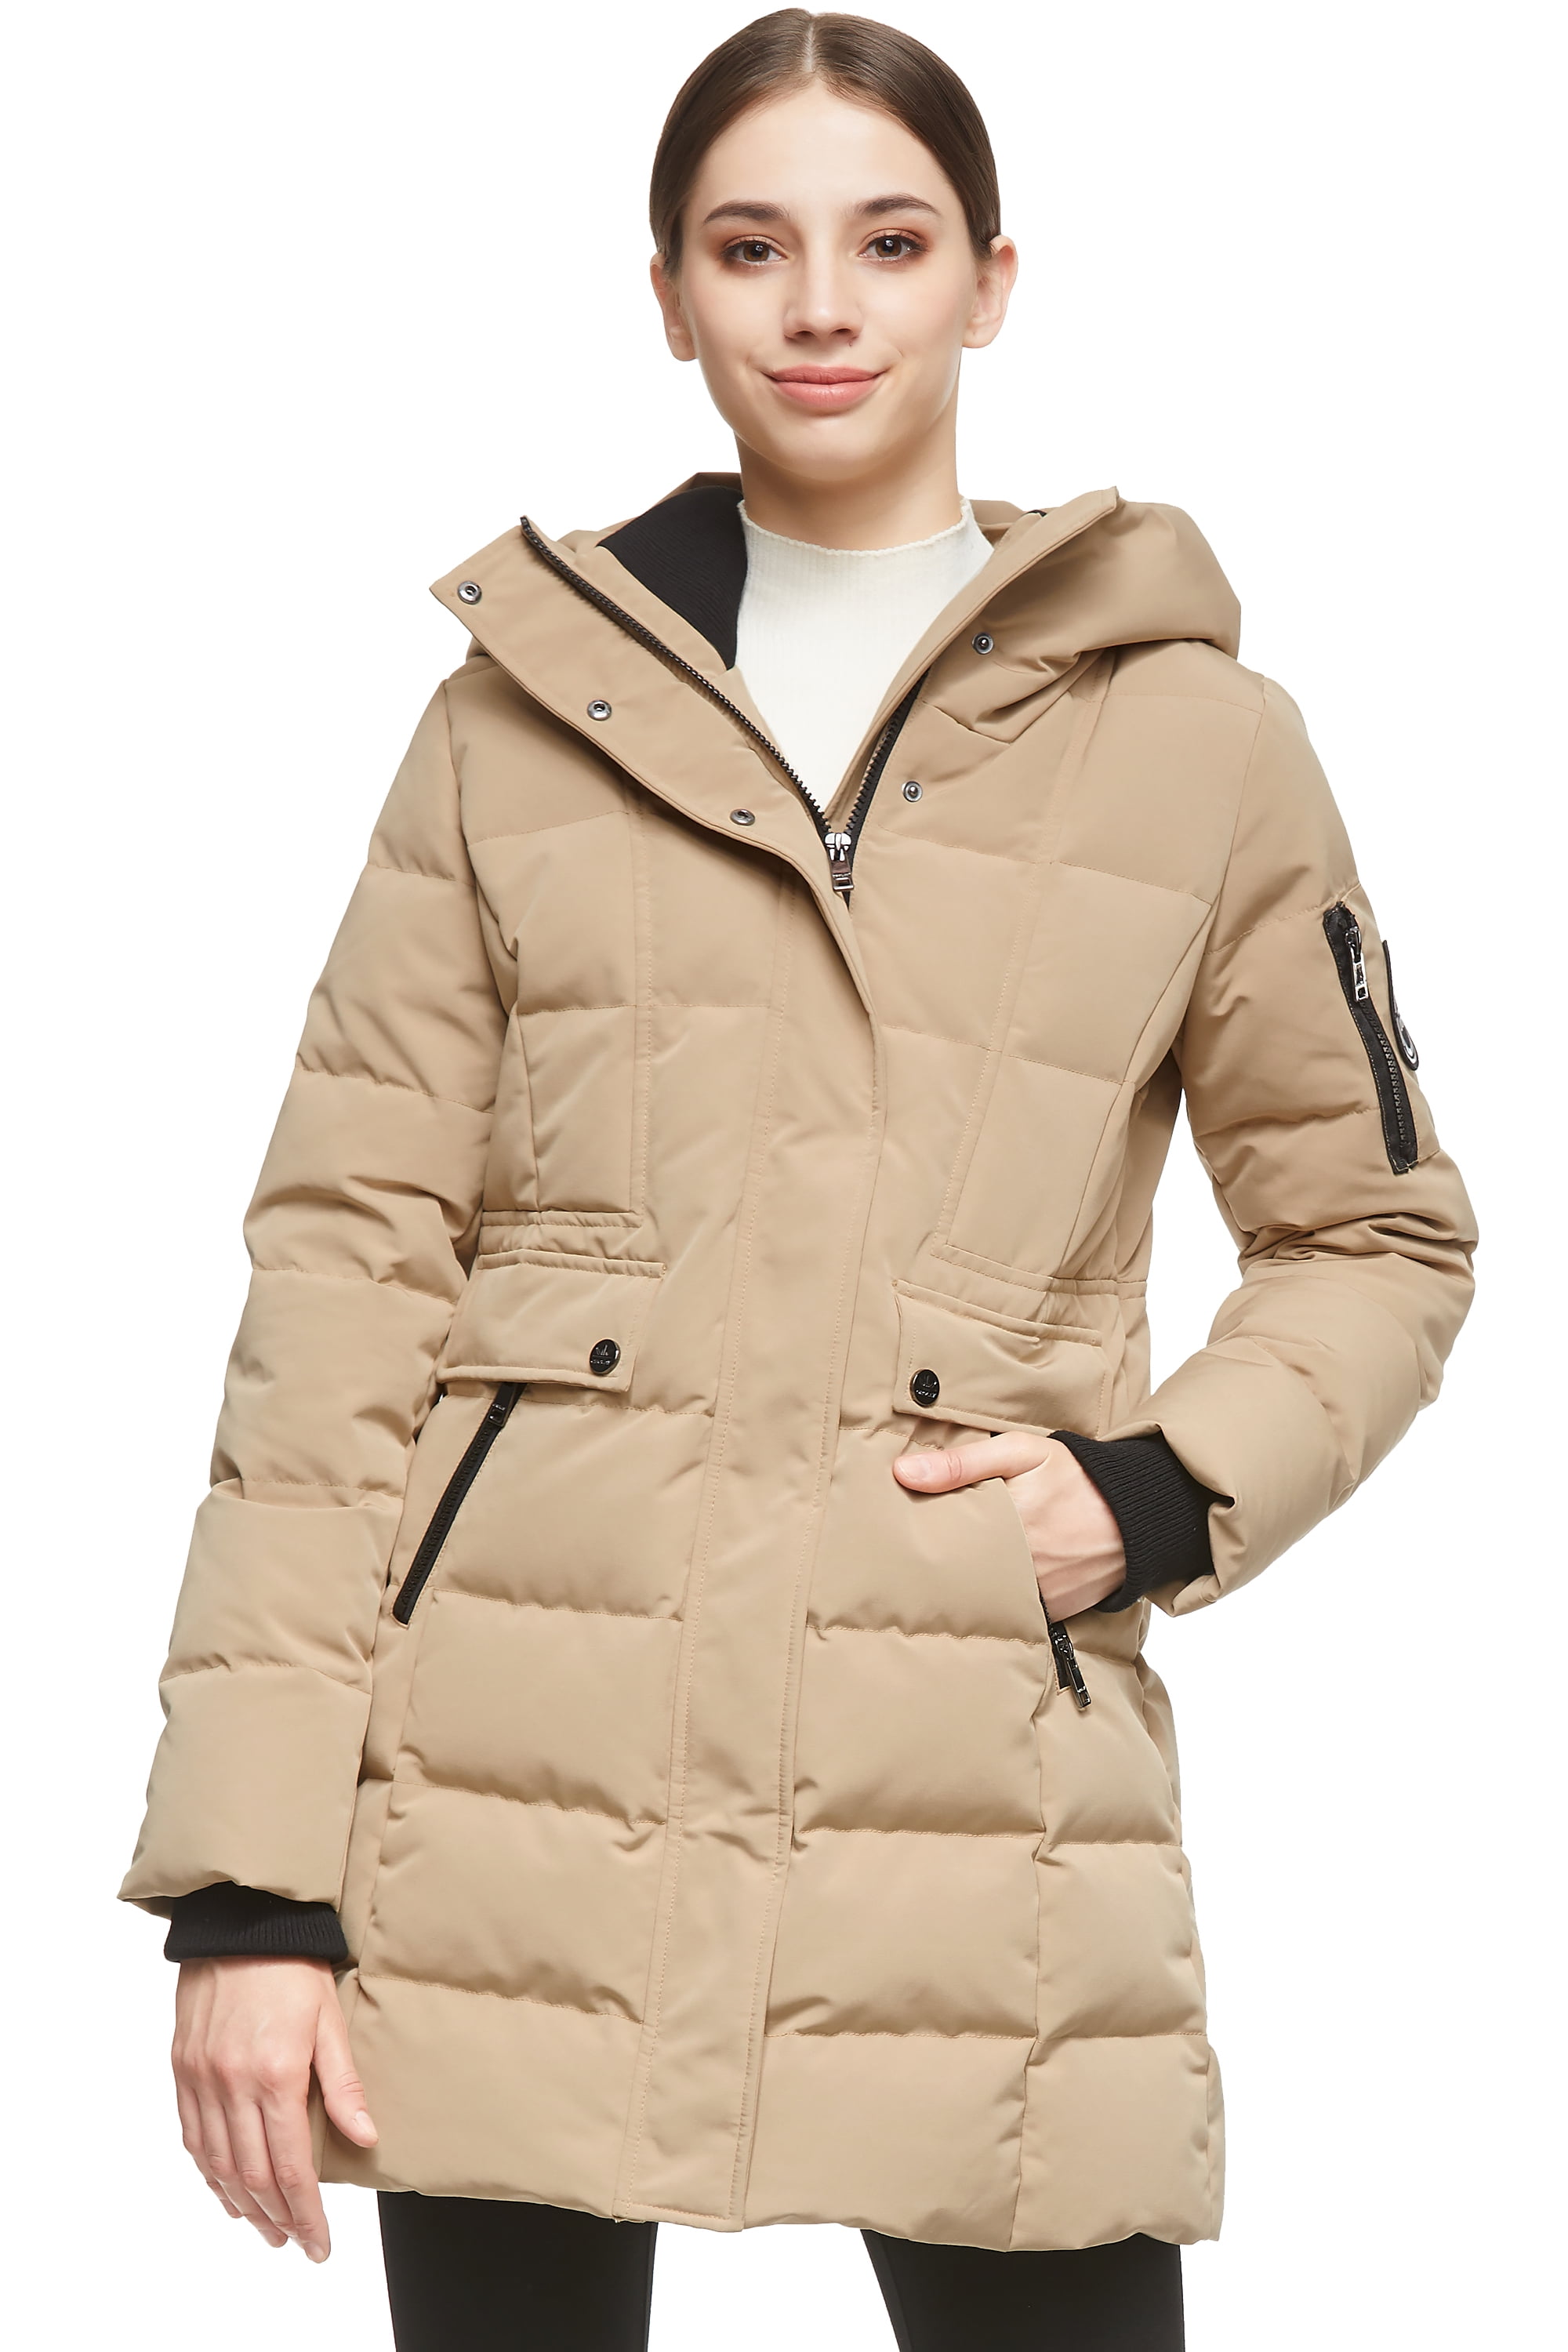 Orolay Womens Hooded Down Jacket Warm Winter Coat Puffer Jacket with Belt 